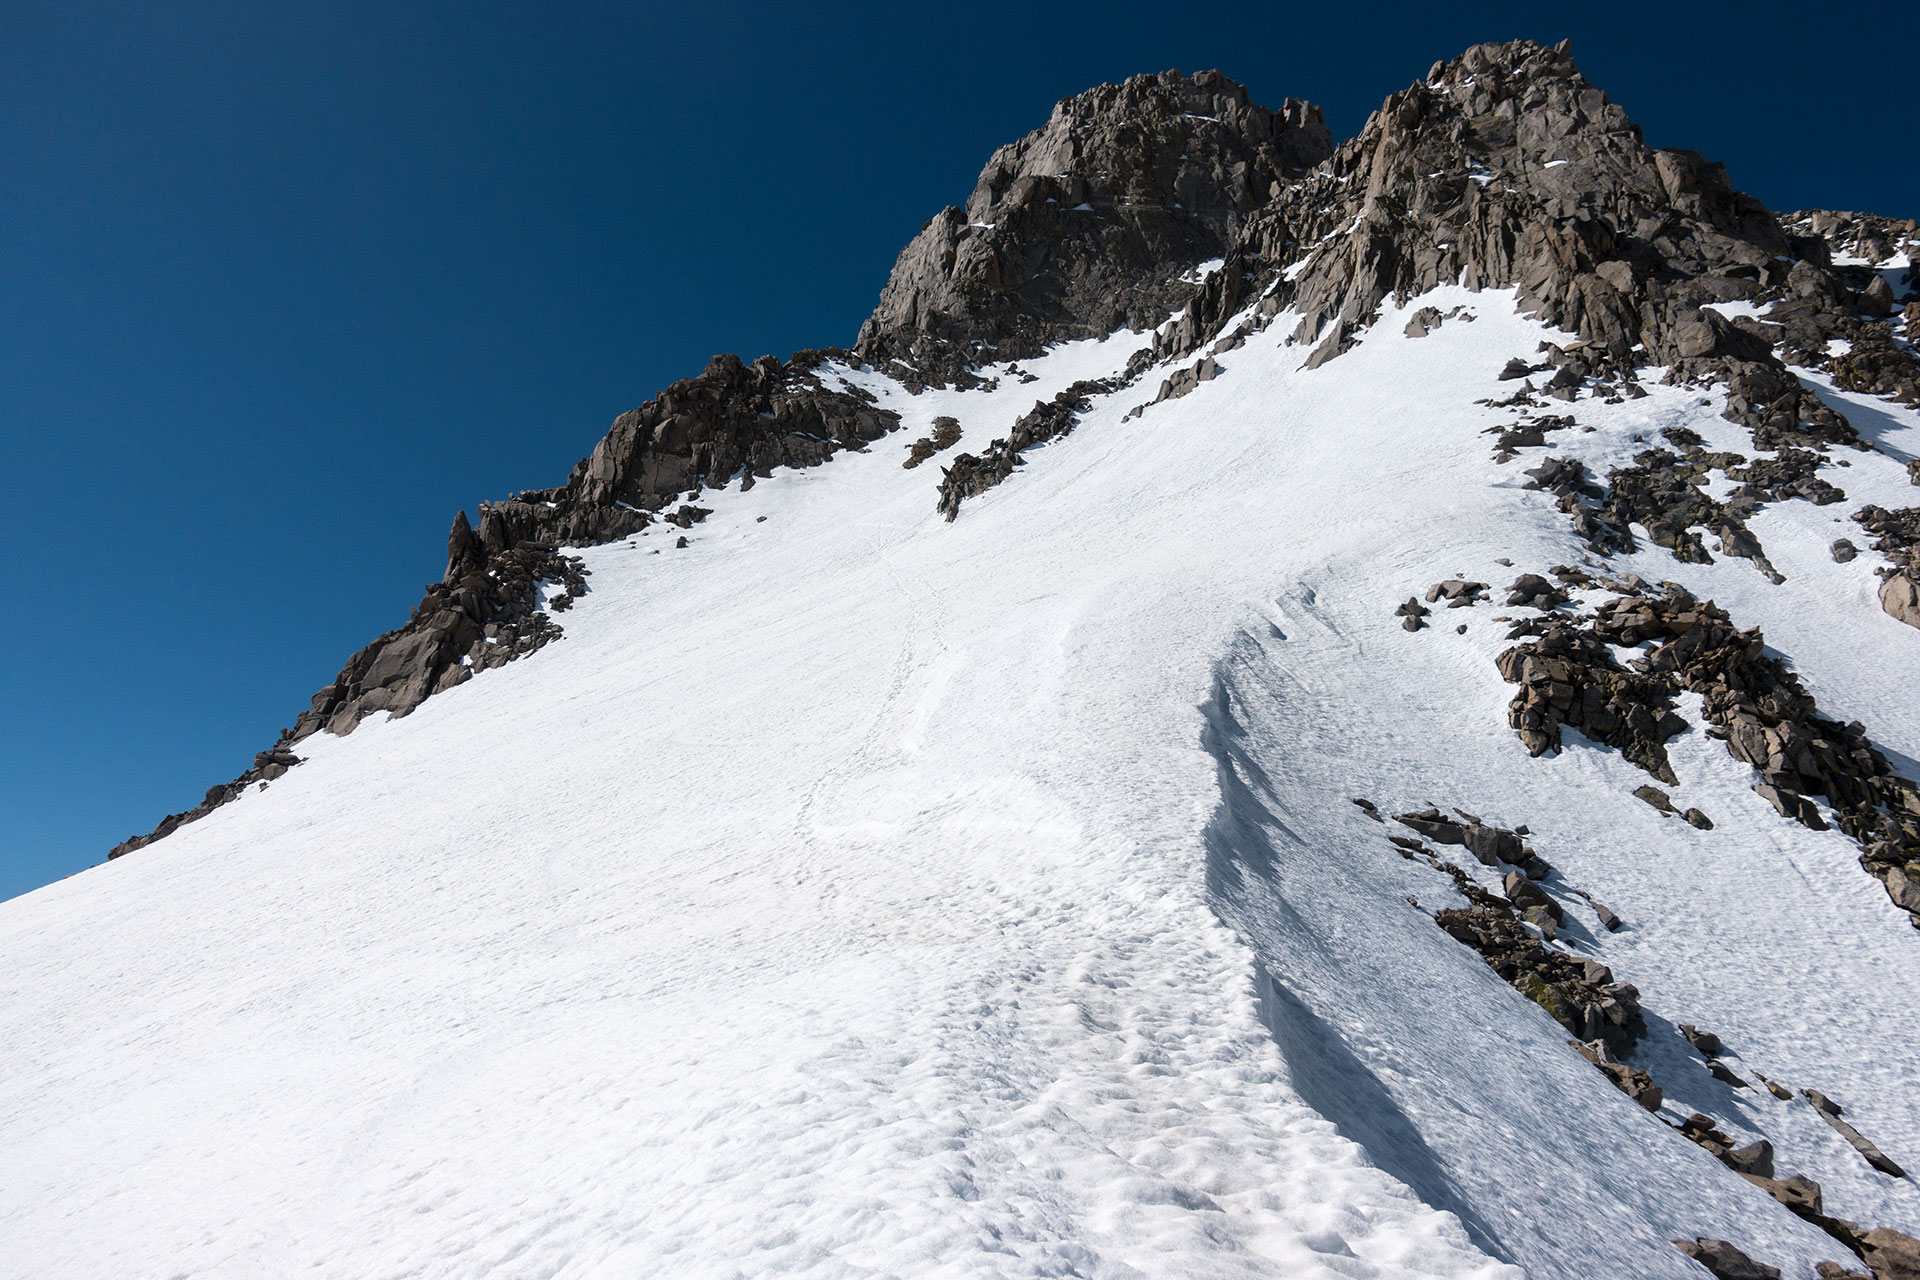 Mount Sill & the L-Shaped Couloir from Glacier Notch